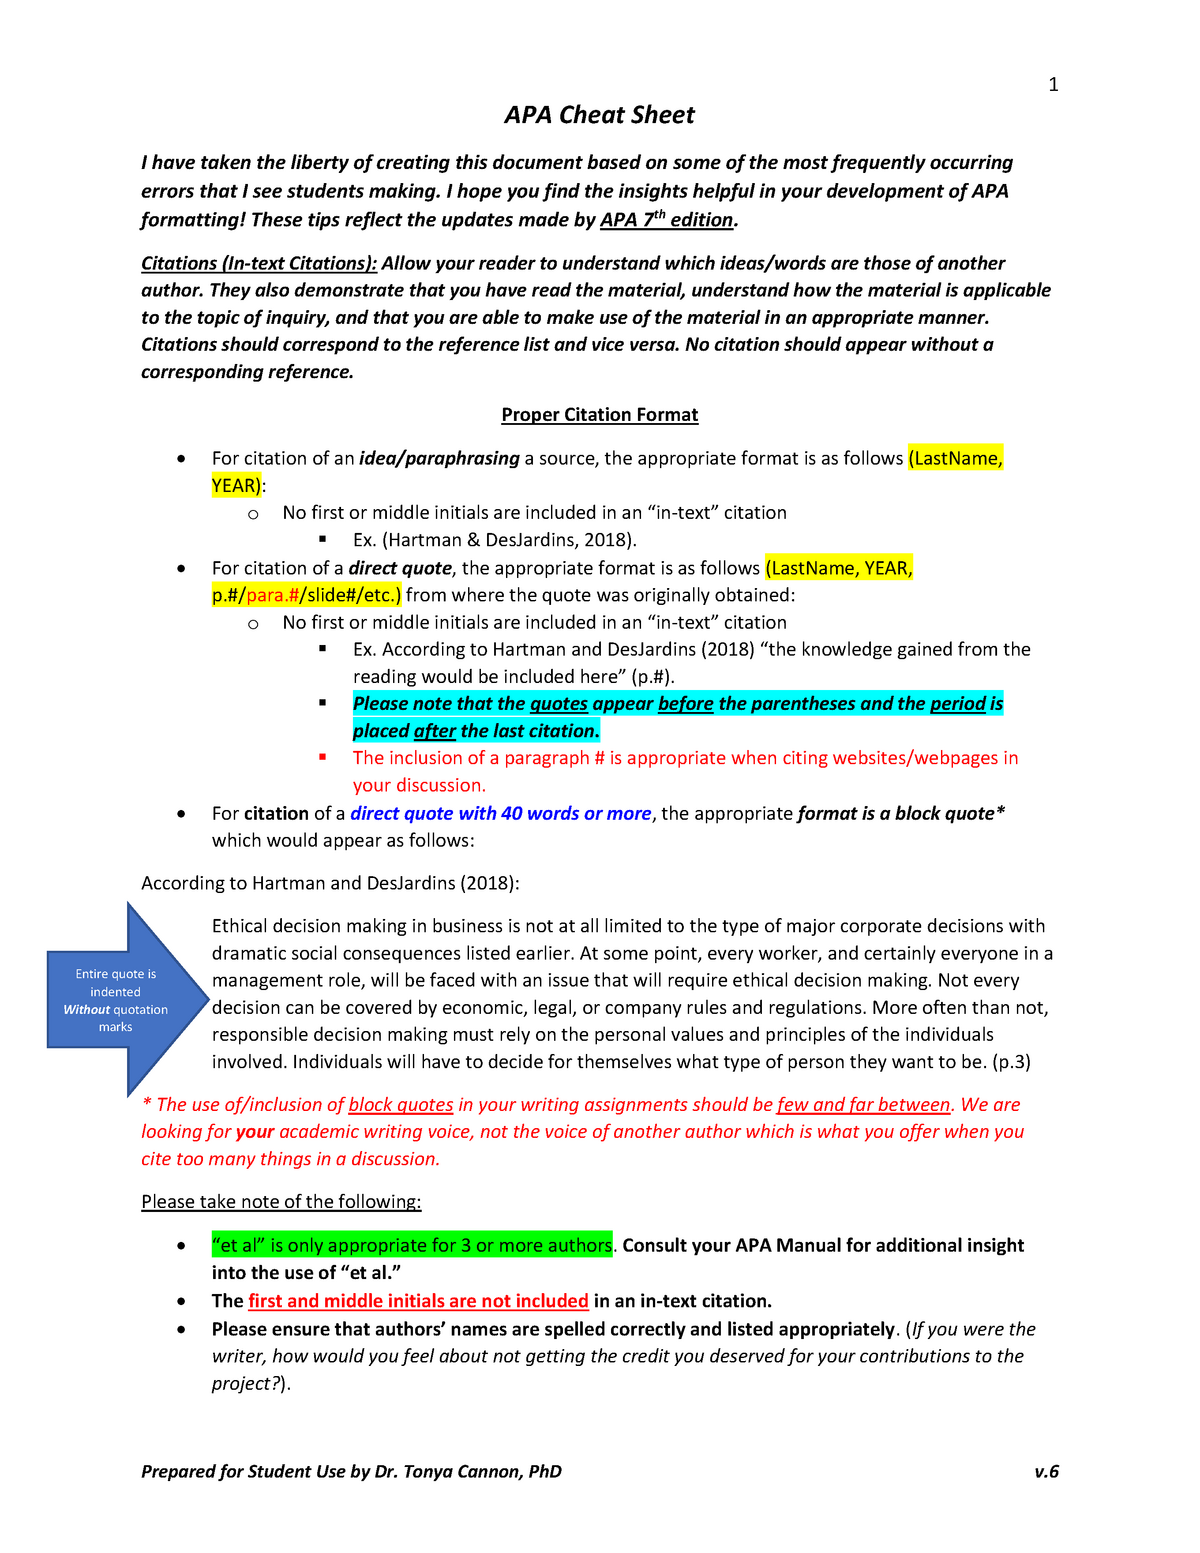 Apa Cheat Sheet Lecture Notes 3 Warning Tt Undefined Function 32